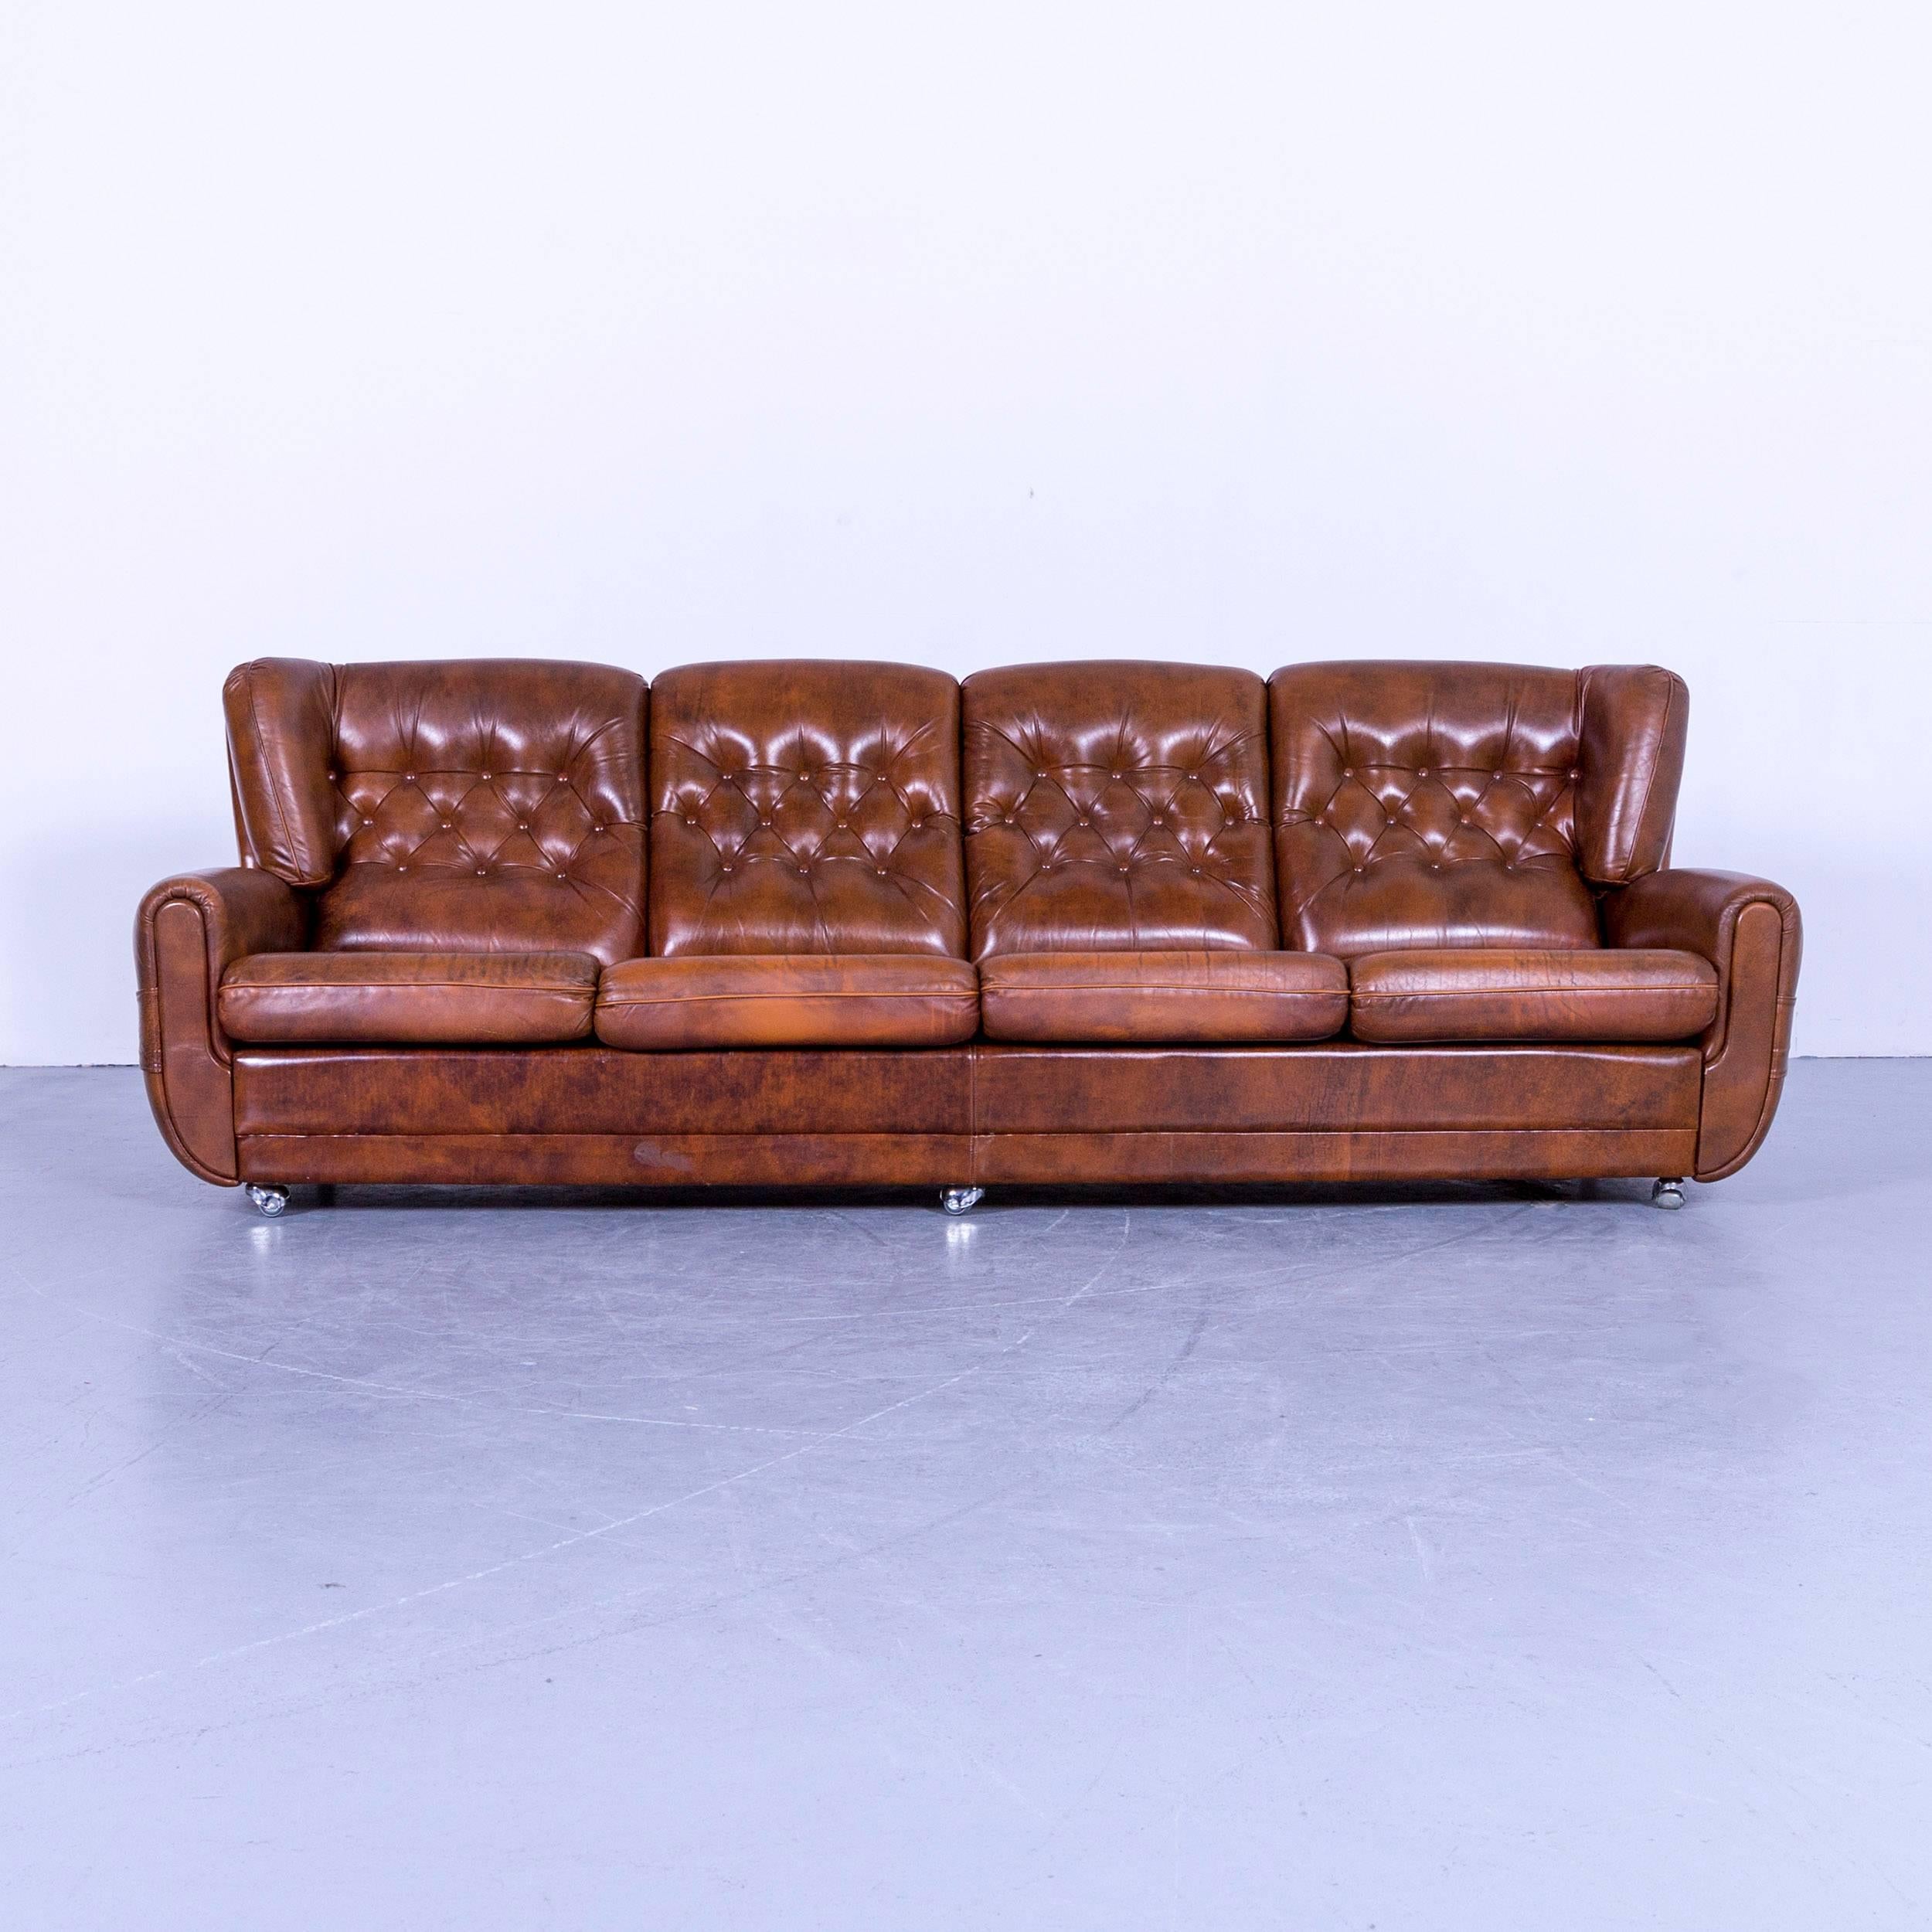 We offer delivery options to most destinations on earth. Find our shipping quotes at the bottom of this page in the shipping section.

An Chesterfield Leather Sofa Set Brown Four Seater 2x Armchair

Shipping:

An on point shipping process is our